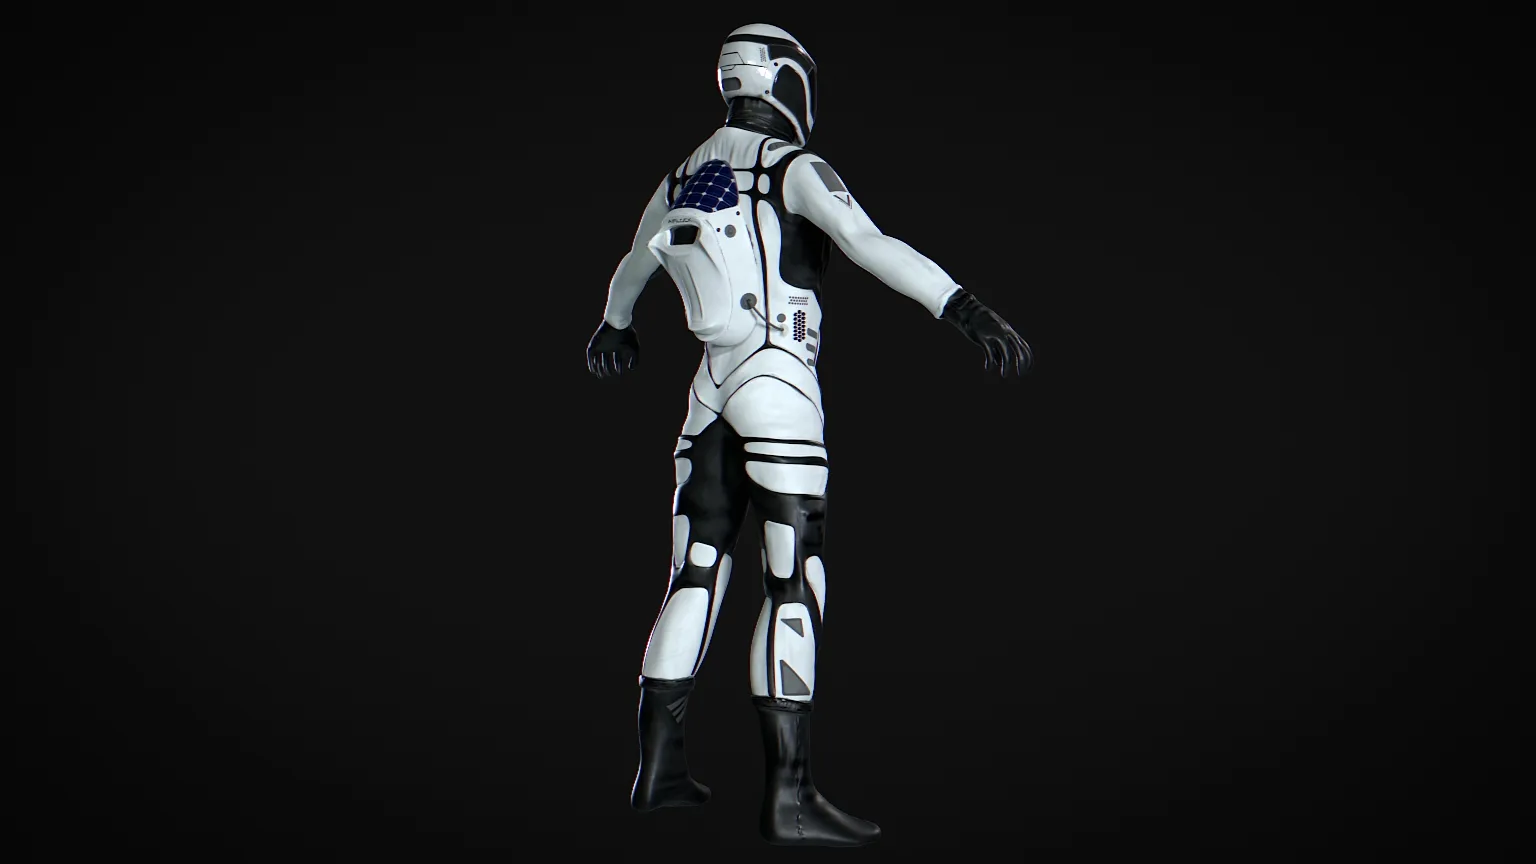 Astronaut in Spacesuit Rigged and Animated